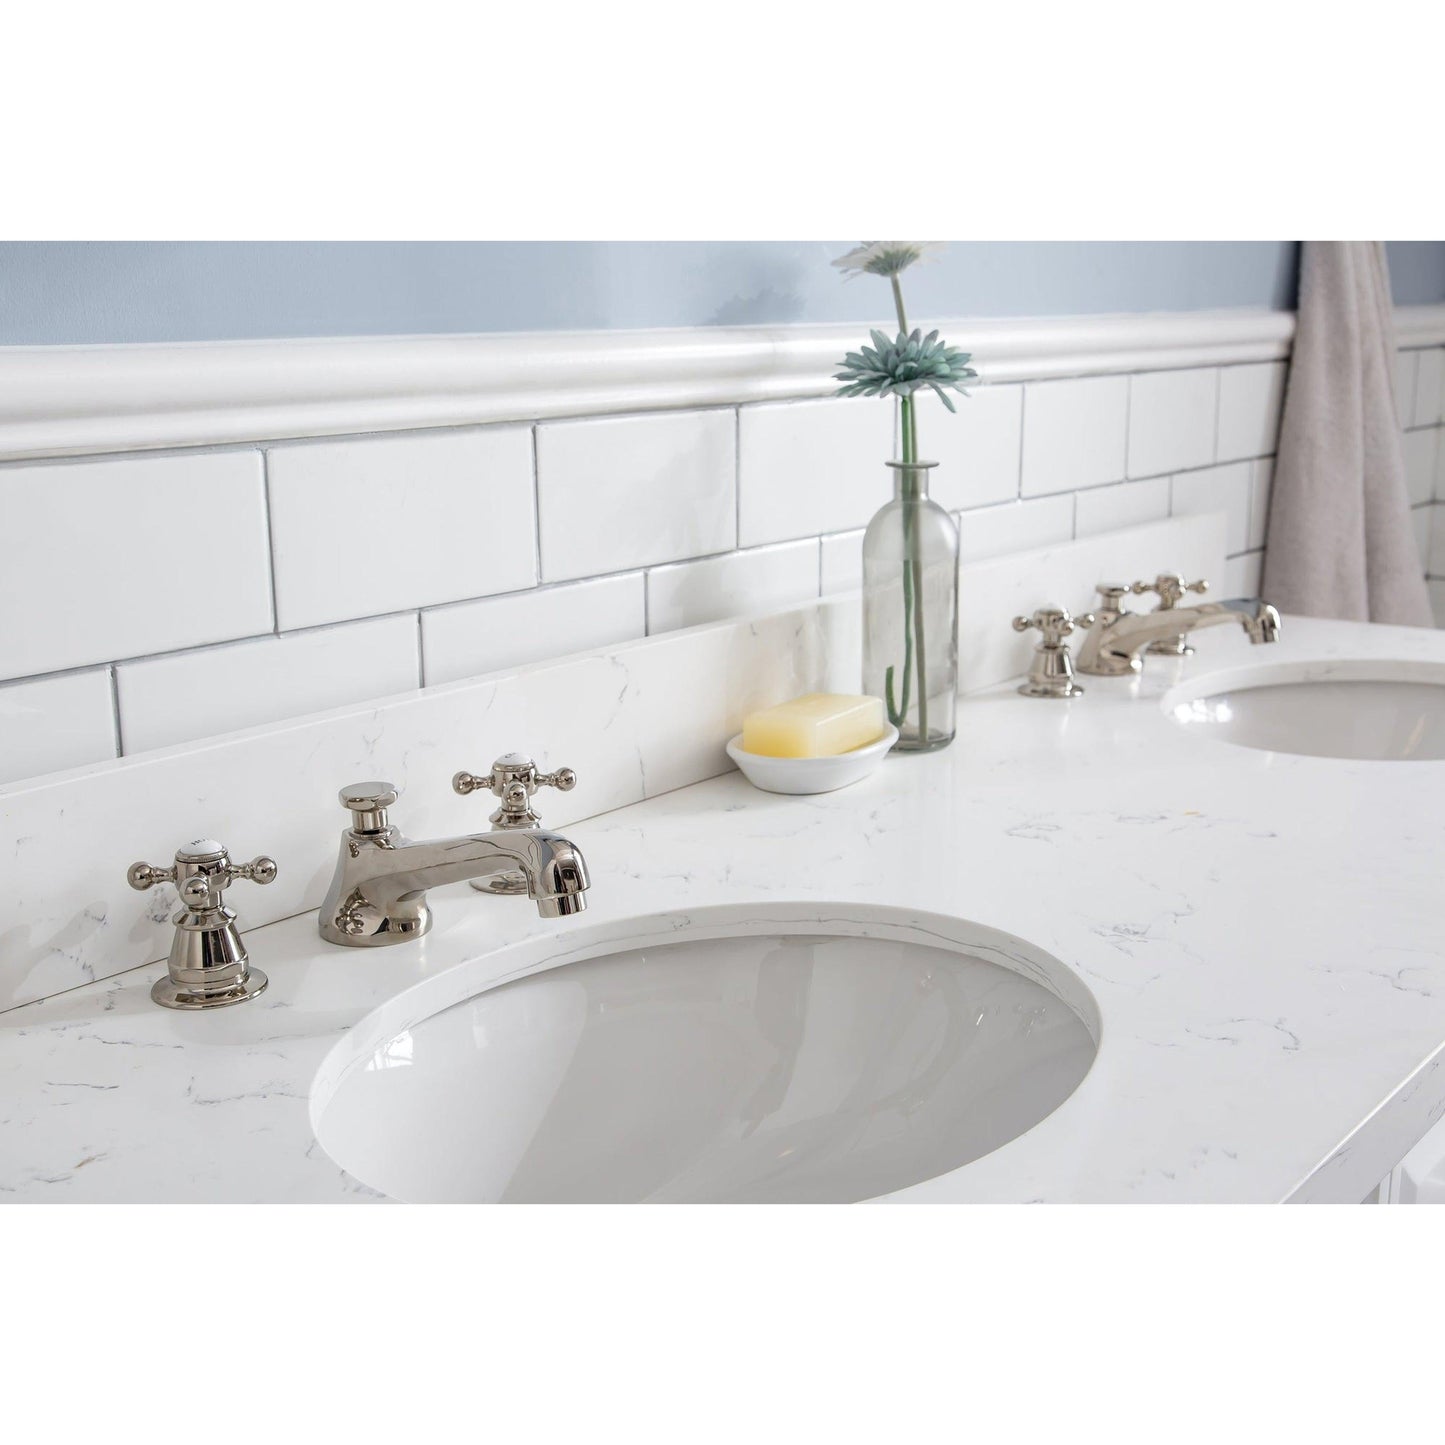 Water Creation Palace 60" Quartz Carrara Pure White Bathroom Vanity Set With Hardware And F2-0009 Faucets in Polished Nickel (PVD) Finish